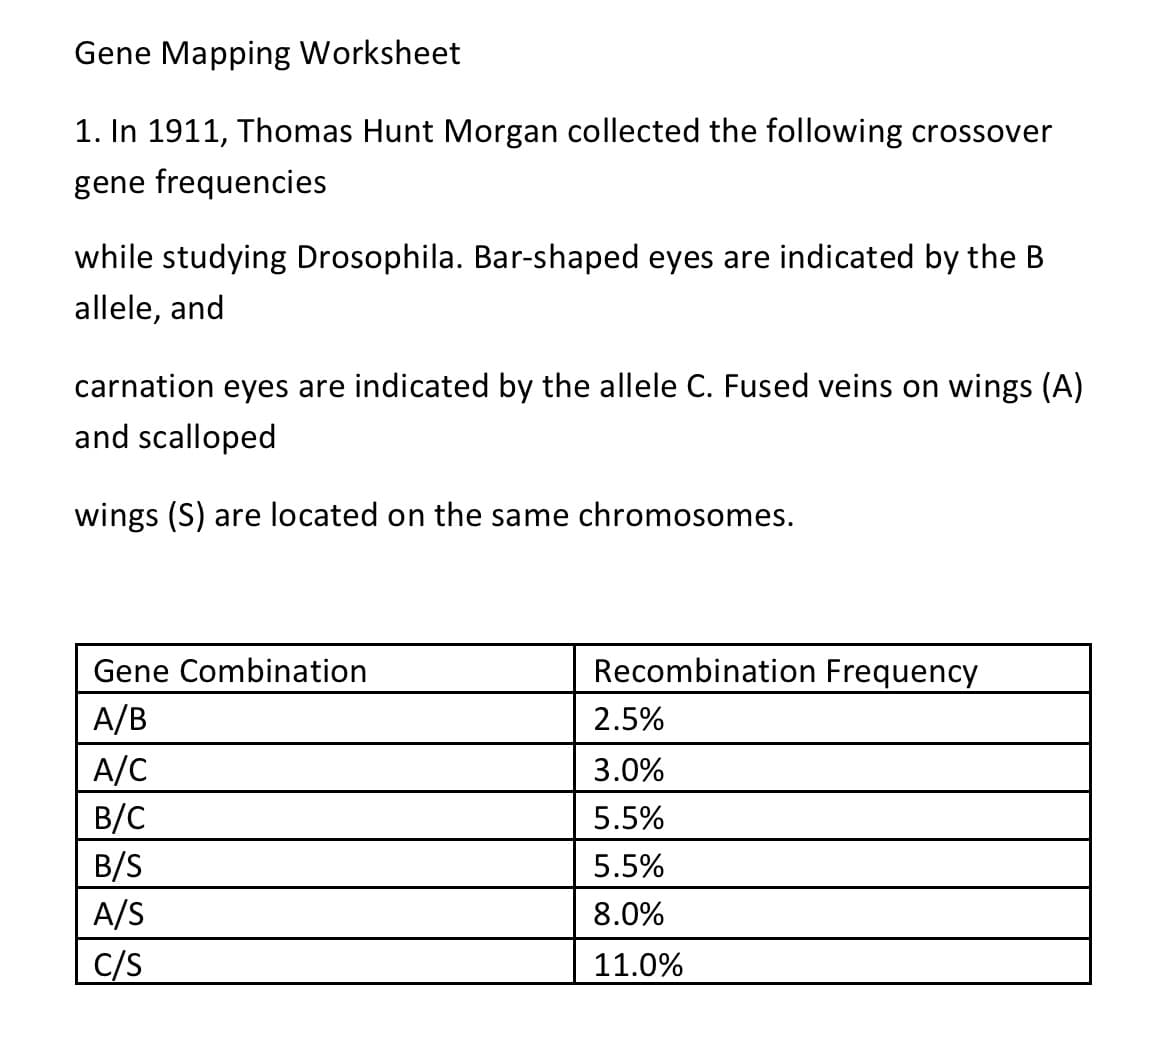 Gene Mapping Worksheet
1. In 1911, Thomas Hunt Morgan collected the following crossover
gene frequencies
while studying Drosophila. Bar-shaped eyes are indicated by the B
allele, and
carnation eyes are indicated by the allele C. Fused veins on wings (A)
and scalloped
wings (S) are located on the same chromosomes.
Gene Combination
A/B
A/C
B/C
B/S
A/S
C/S
Recombination Frequency
2.5%
3.0%
5.5%
5.5%
8.0%
11.0%